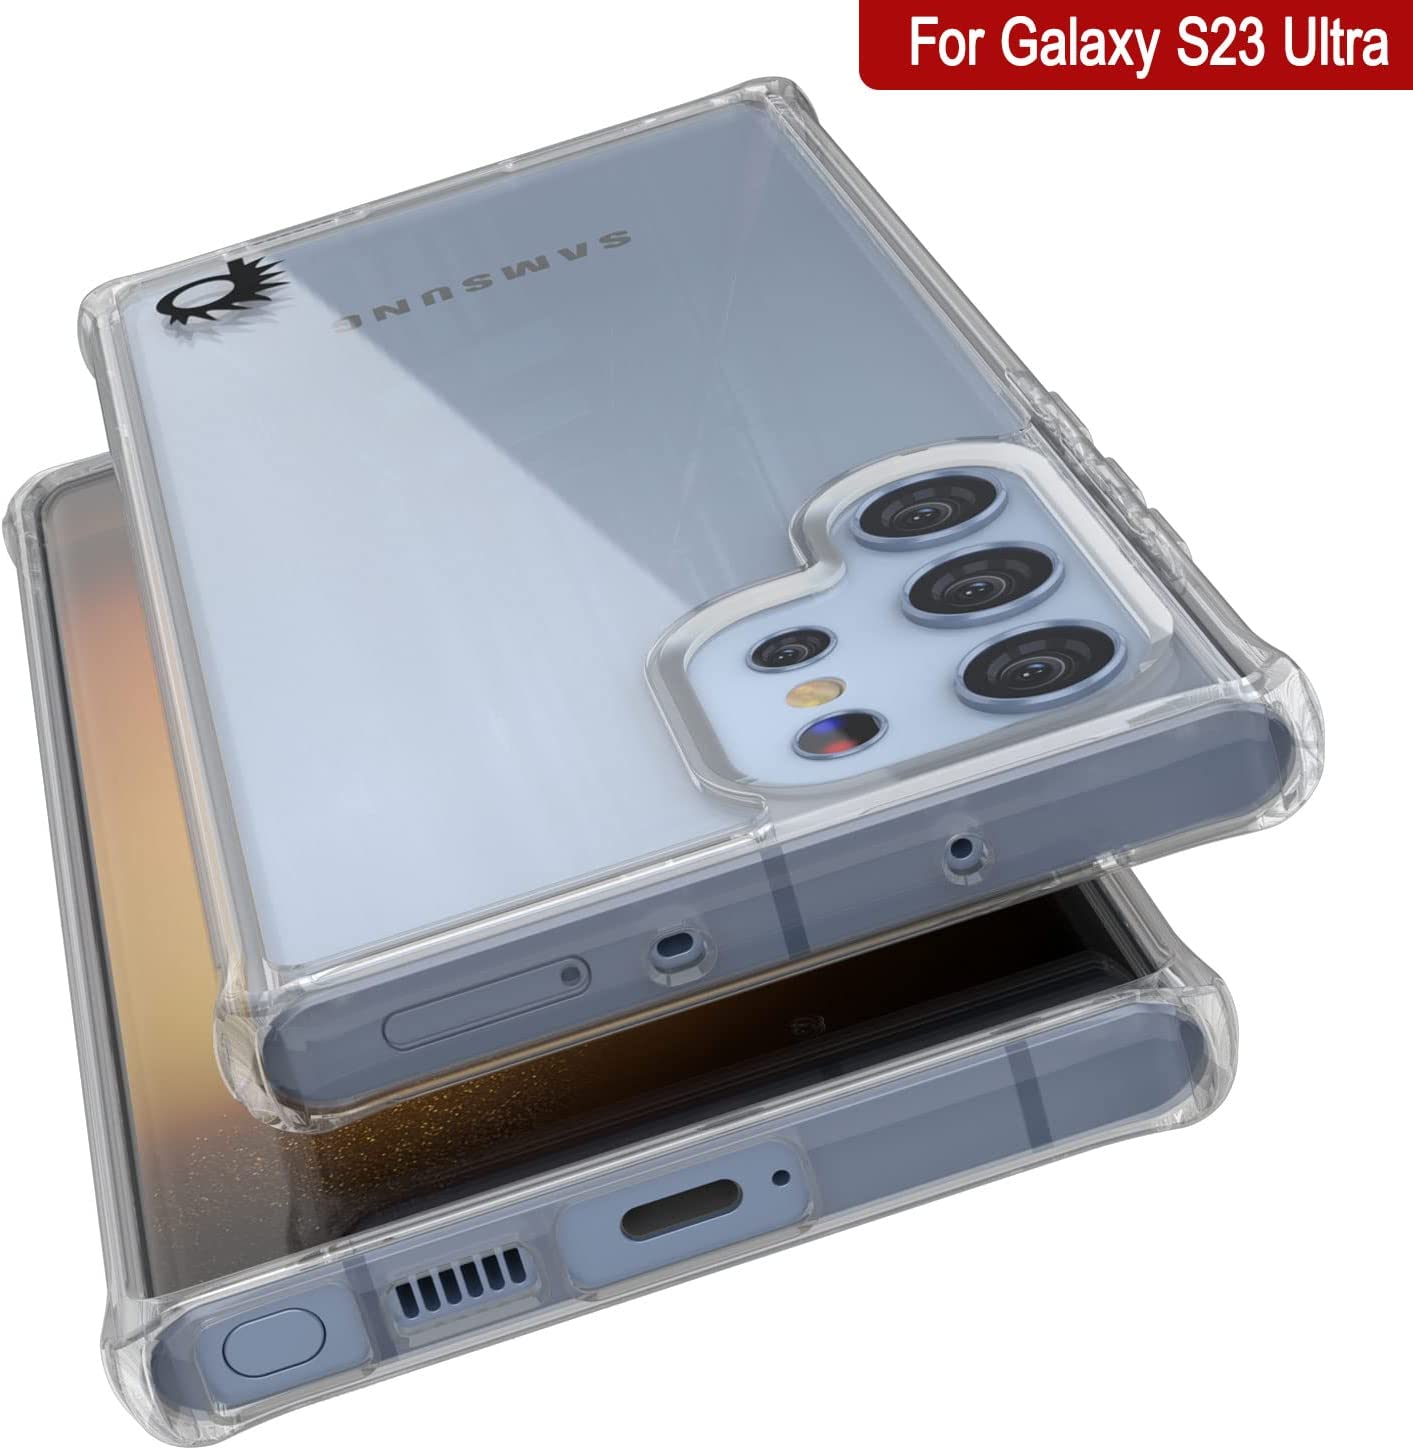 PunkCase Galaxy S23 Ultra Case [Clear Acrylic Series] for Galaxy S23 Ultra 5G (6.8") (2023) [Clear]